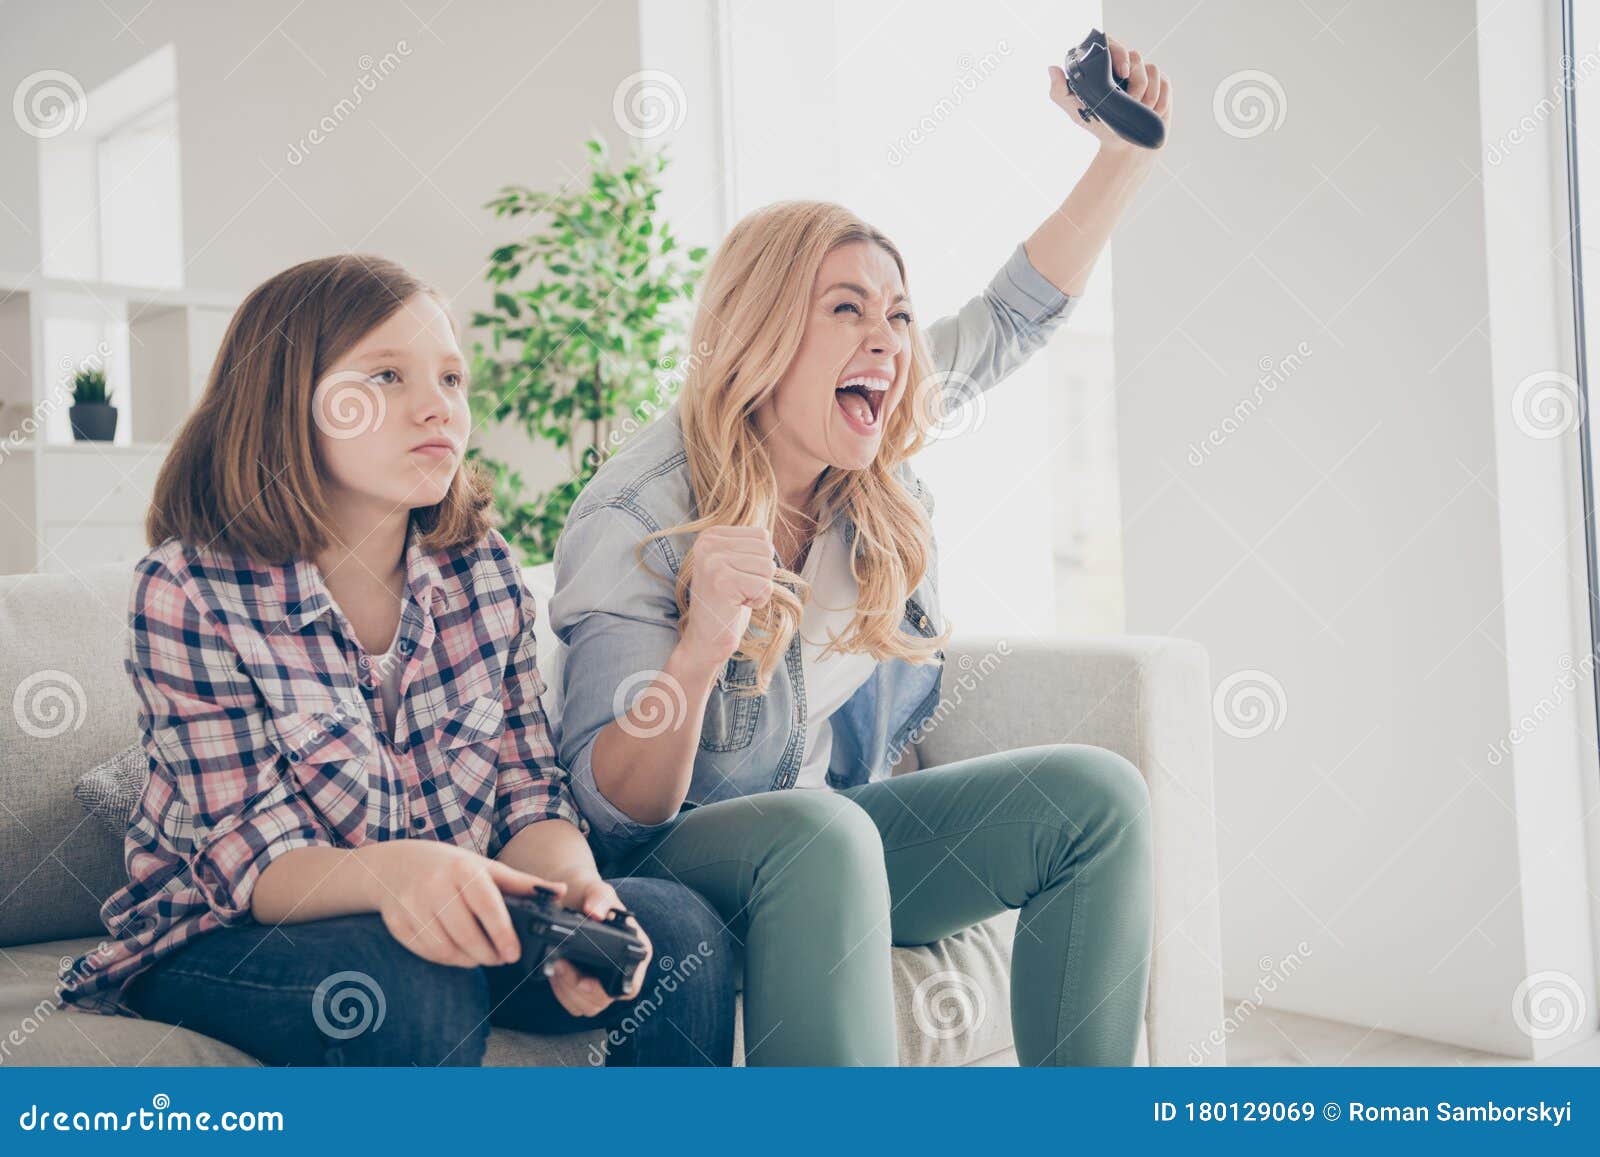 Photo of Crazy Funny Blond Lady Yelling Mom Daughter Sit Sofa Hold Joystick  Play Video Game Winner Loser Stay Home Stock Image - Image of crazy,  people: 180129069